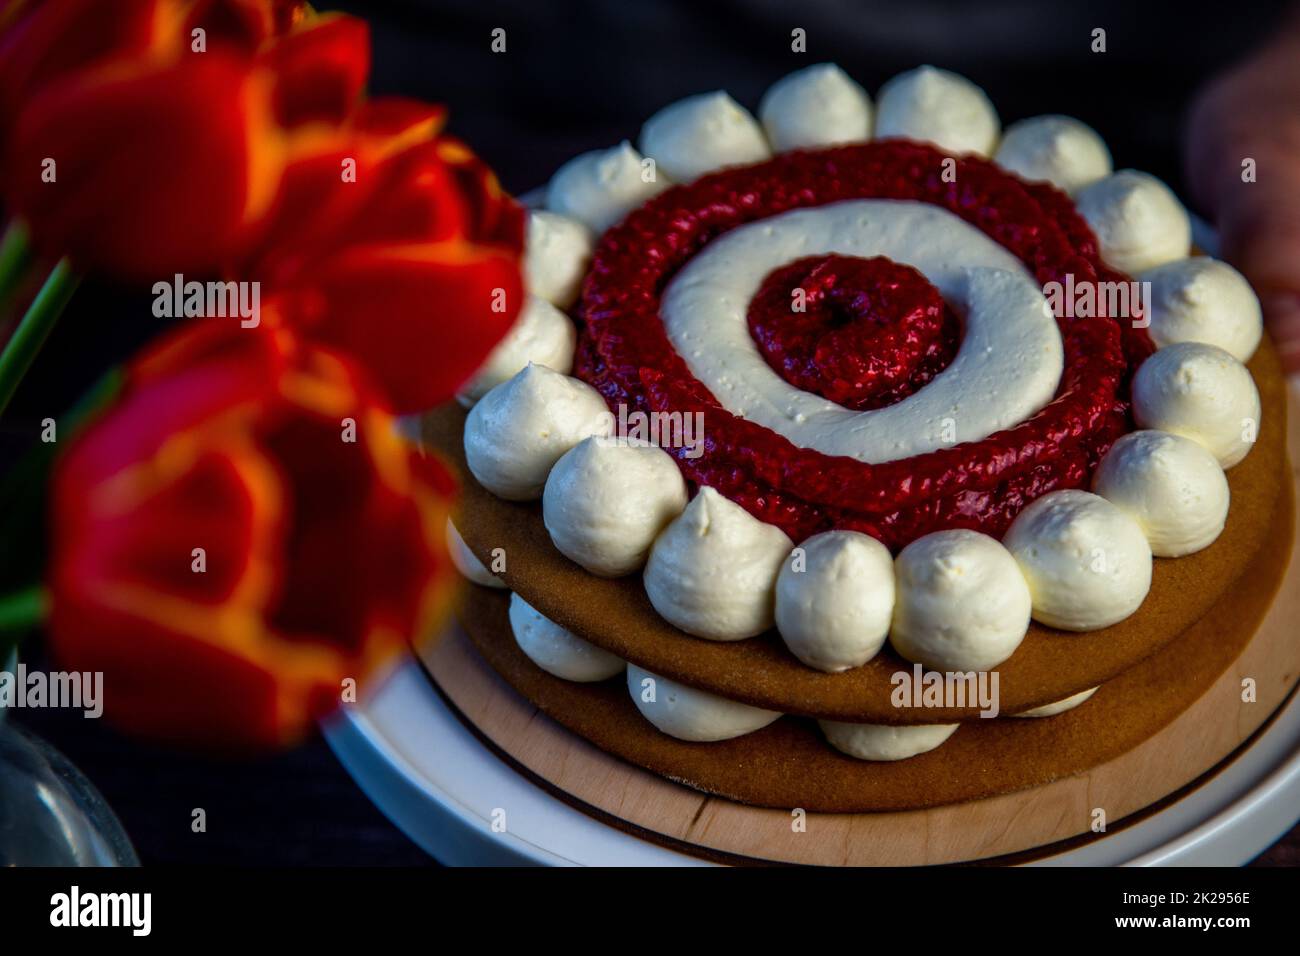 The baked cake cake lies on a wooden substrate and on a white stand, the cake is decorated with white cream and raspberry jam, in a circle, circles alternate, a bouquet of red tulips on a dark background is visible nearby Stock Photo